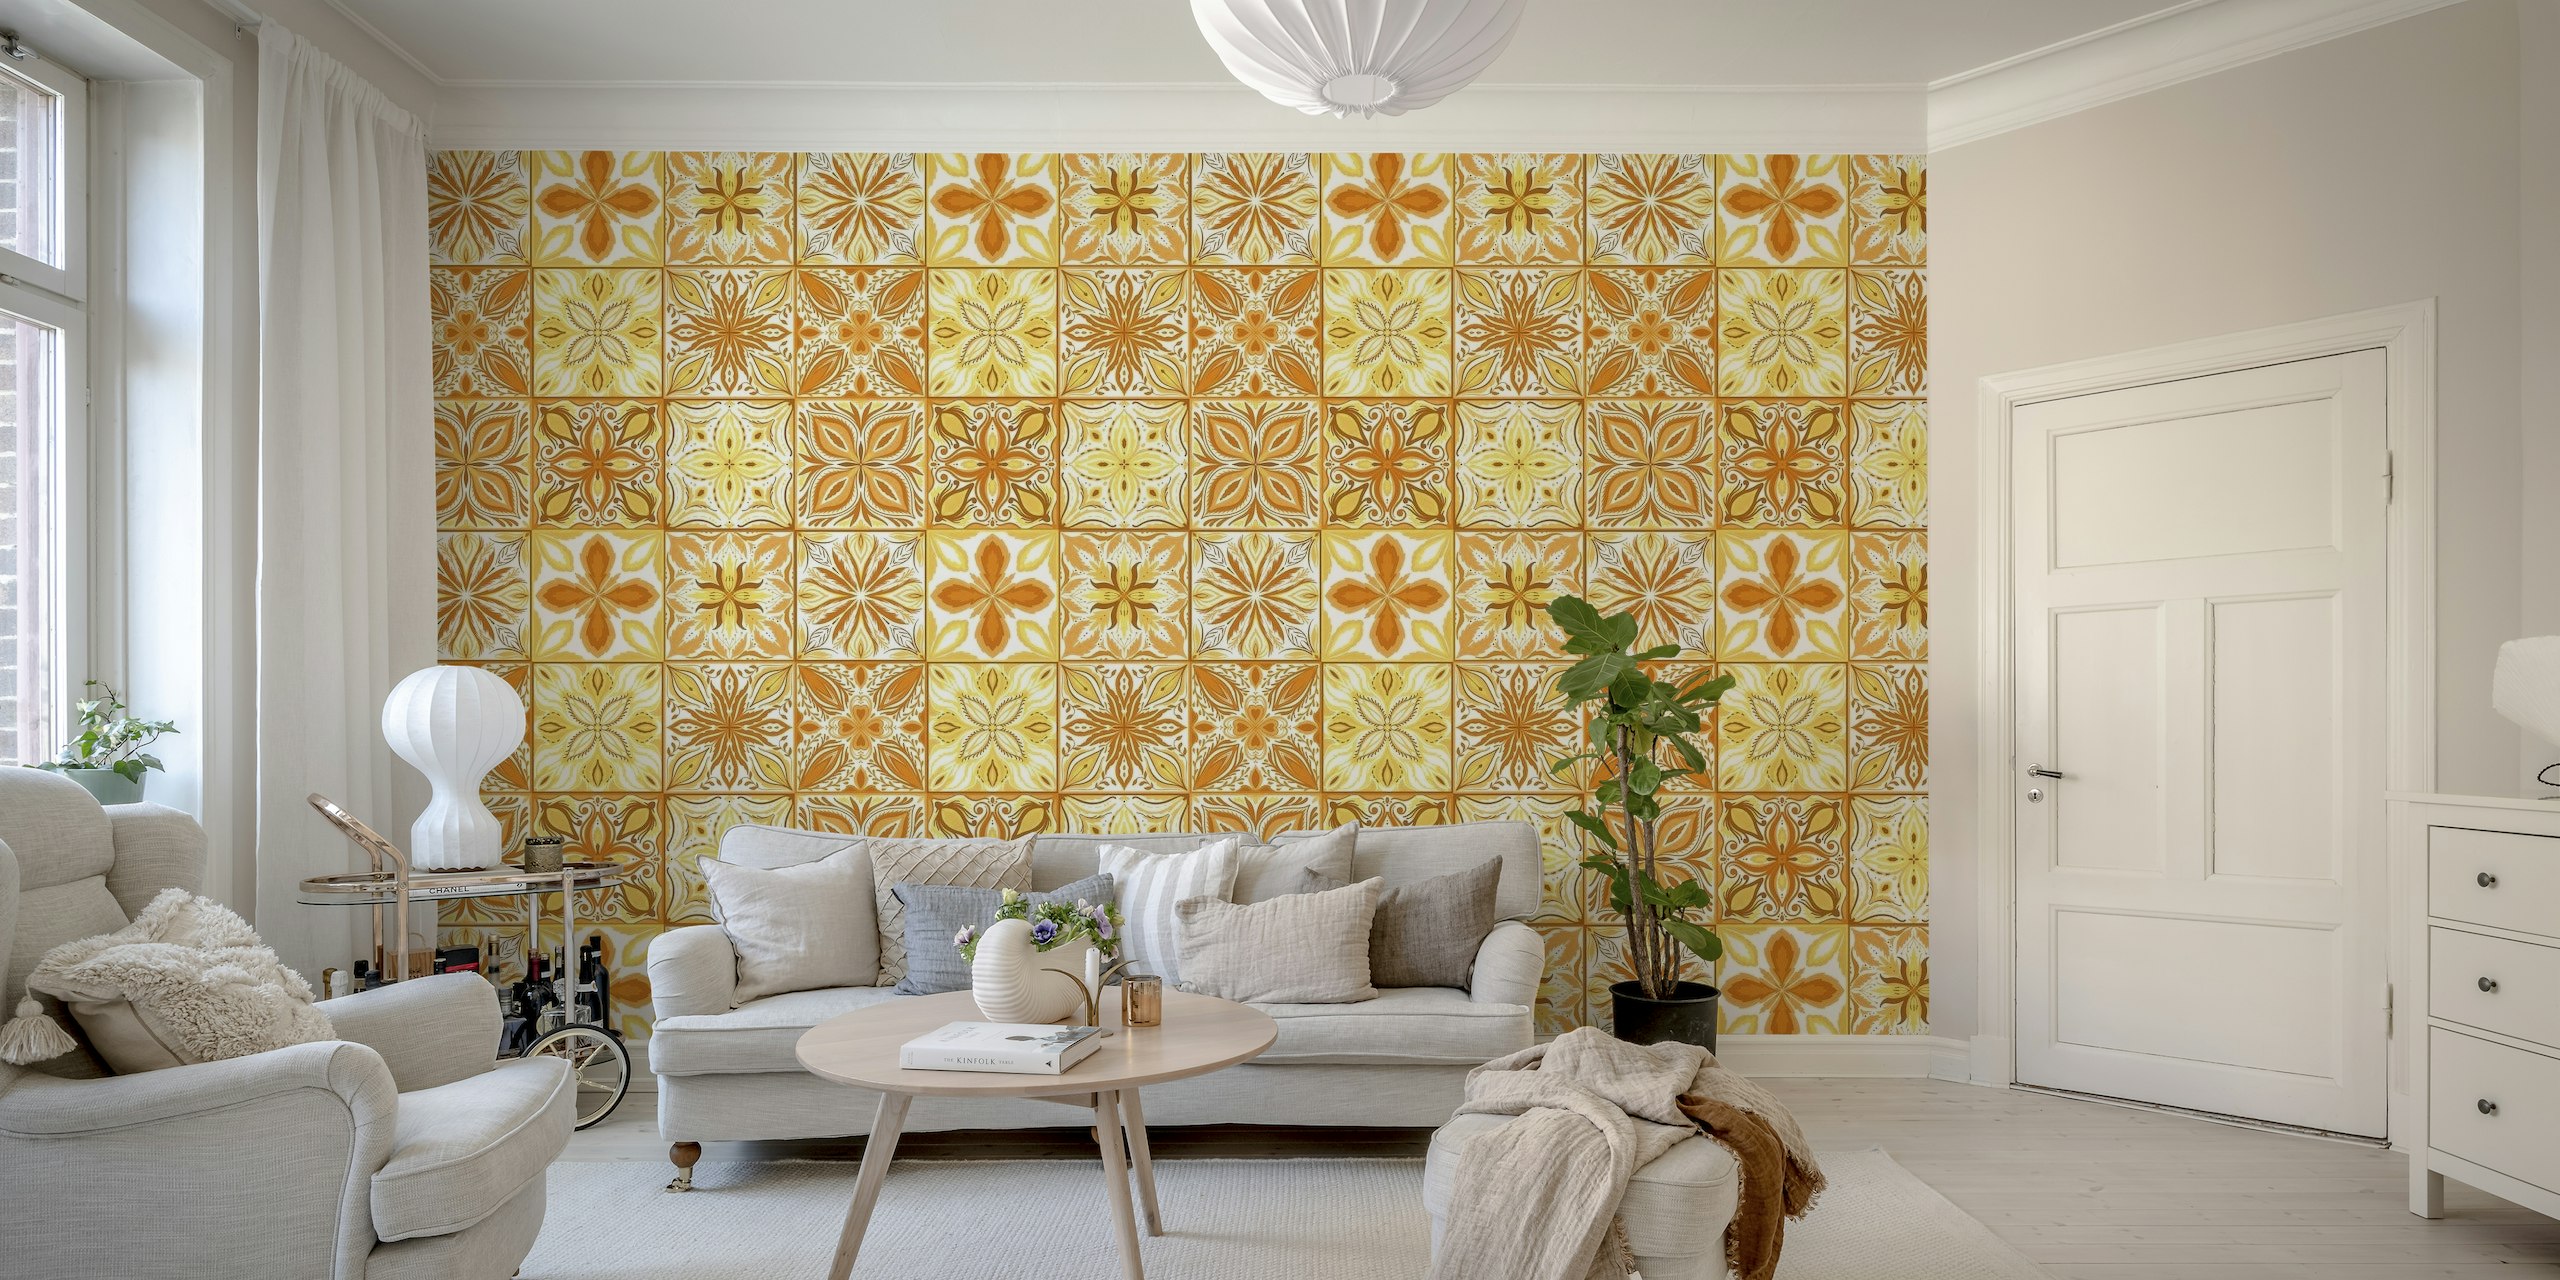 Ornate tiles in orange and yellow wallpaper